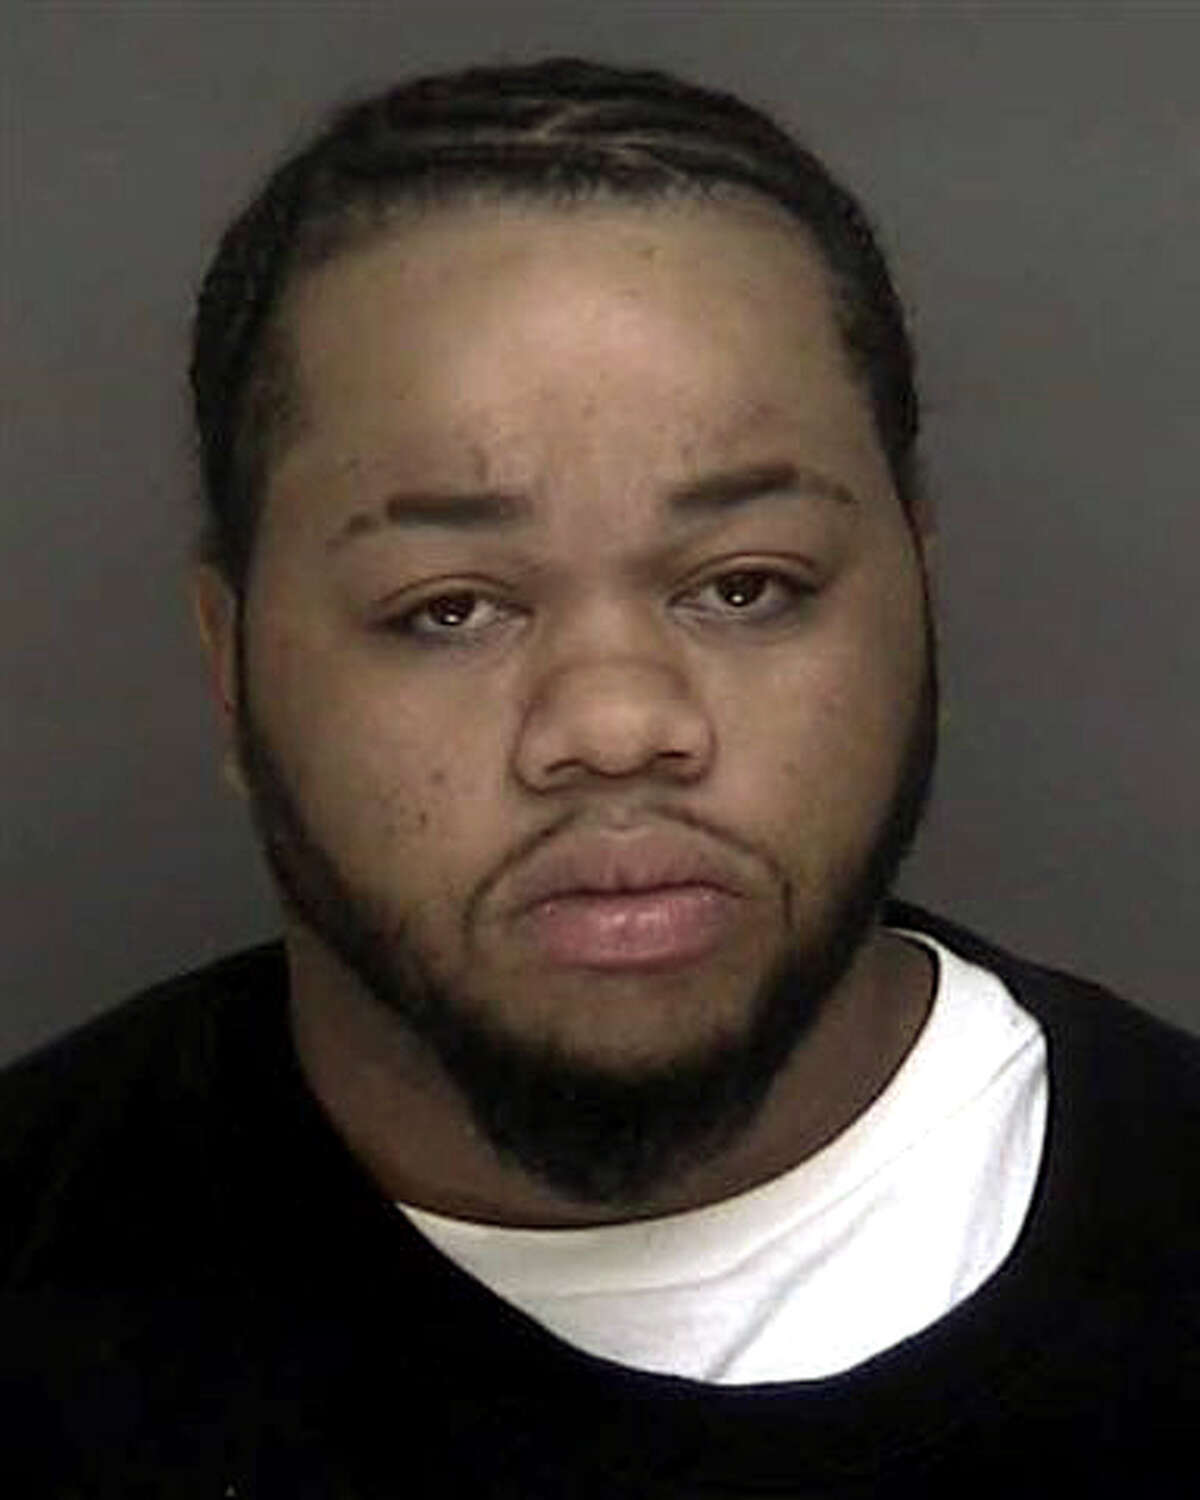 On Friday Dec. 12, 2014, Daquon Gomillion was sentenced to 20 years, suspended after he serves 15 years in prison and followed by three years' probation on the charges of first-degree assault and risk of injury to a child.